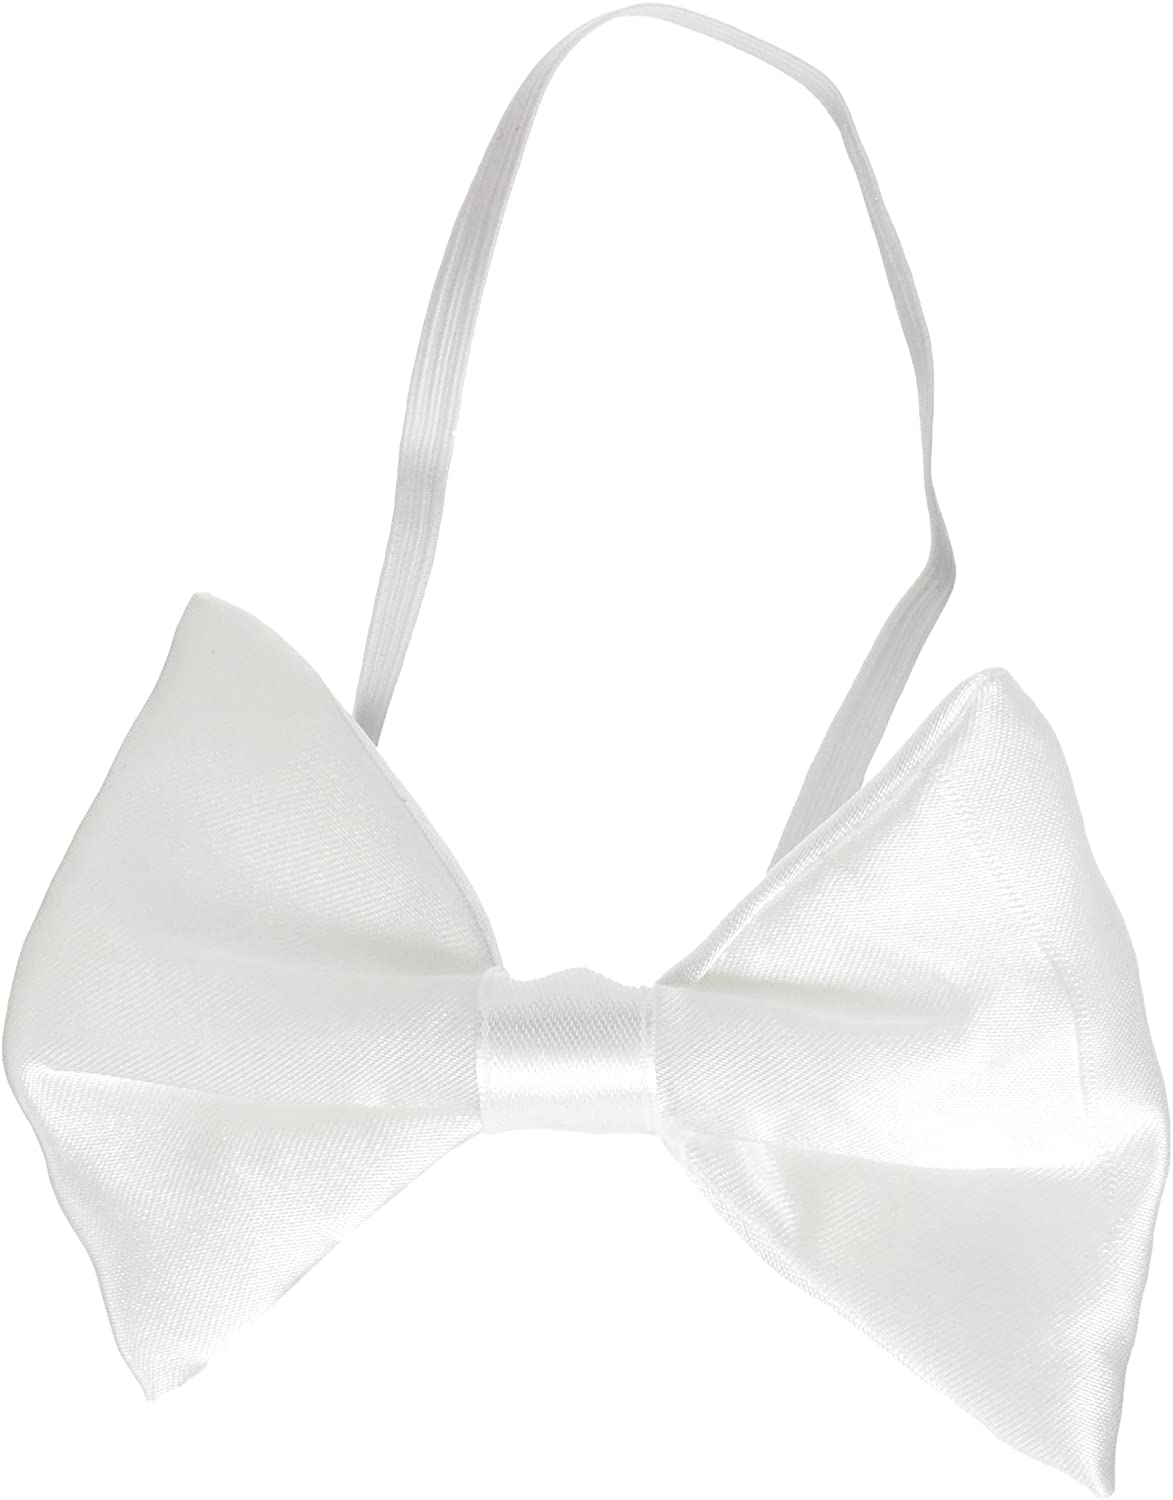 Bow Tie White w/adjustable band